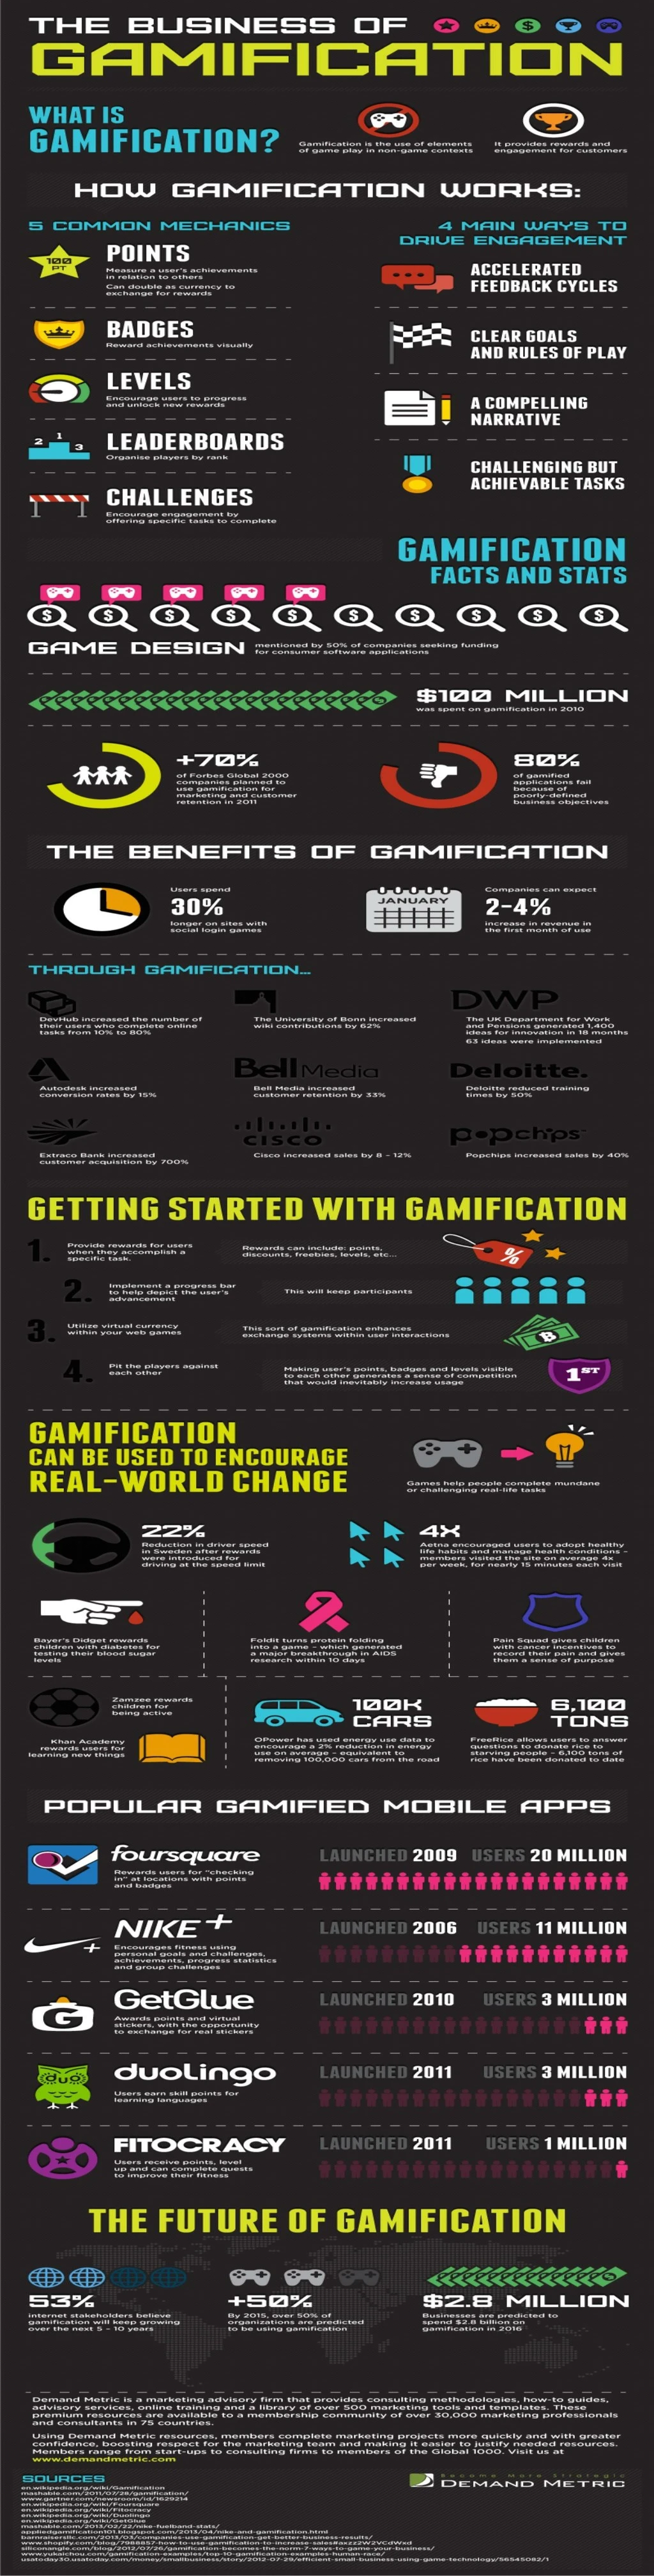 gamification infographic from demand metric